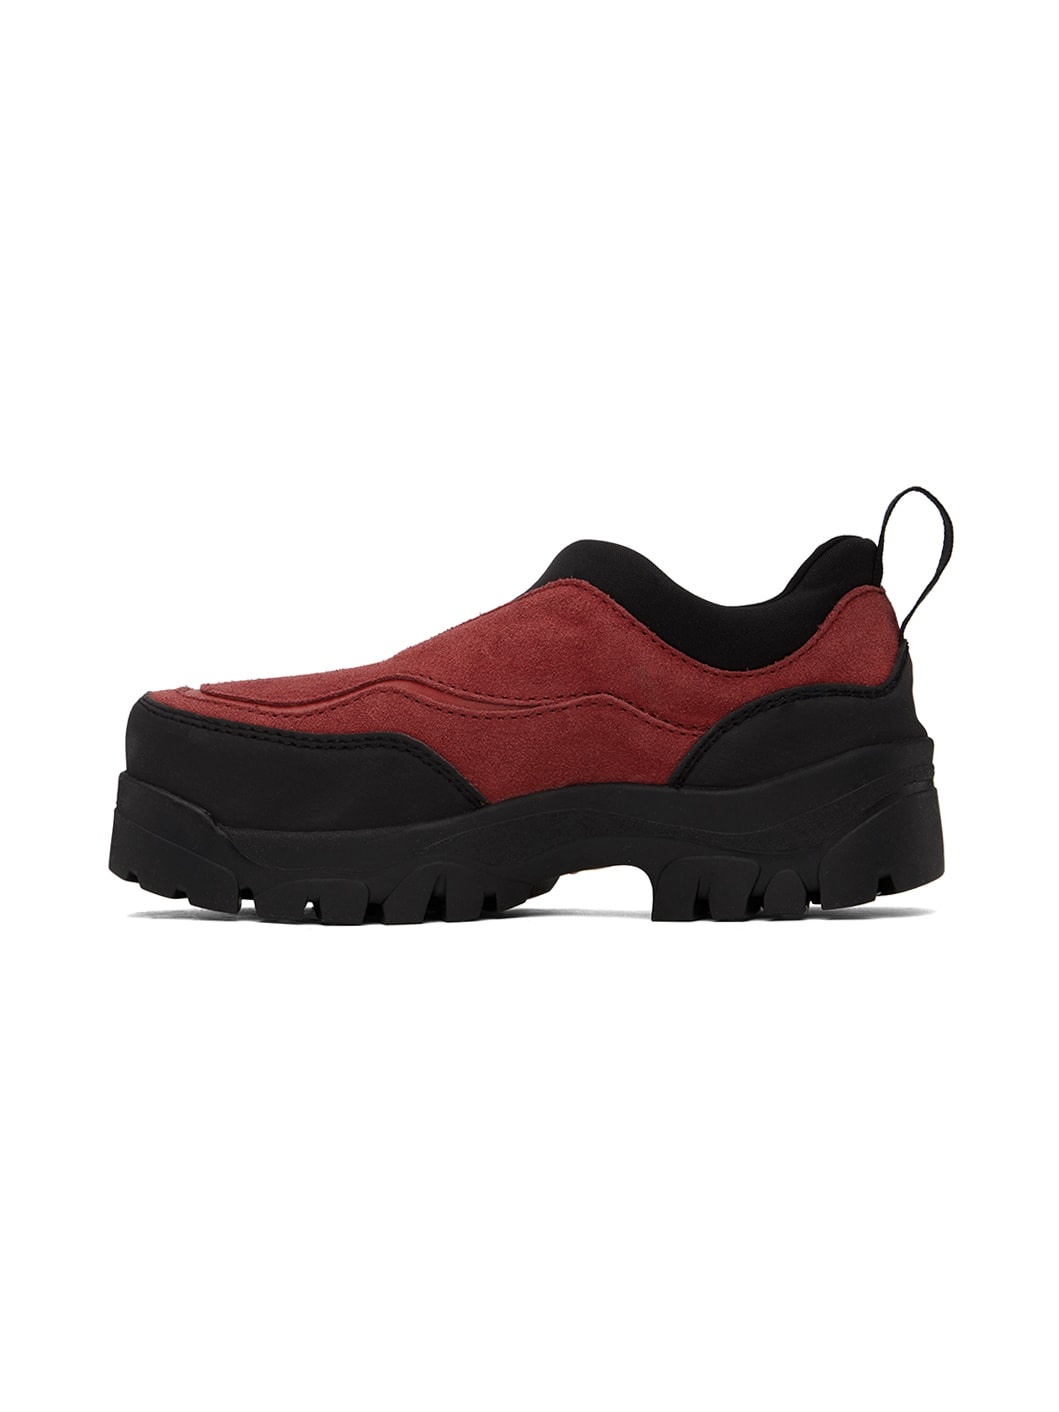 Red Andress Slip-on Sneakers - 3